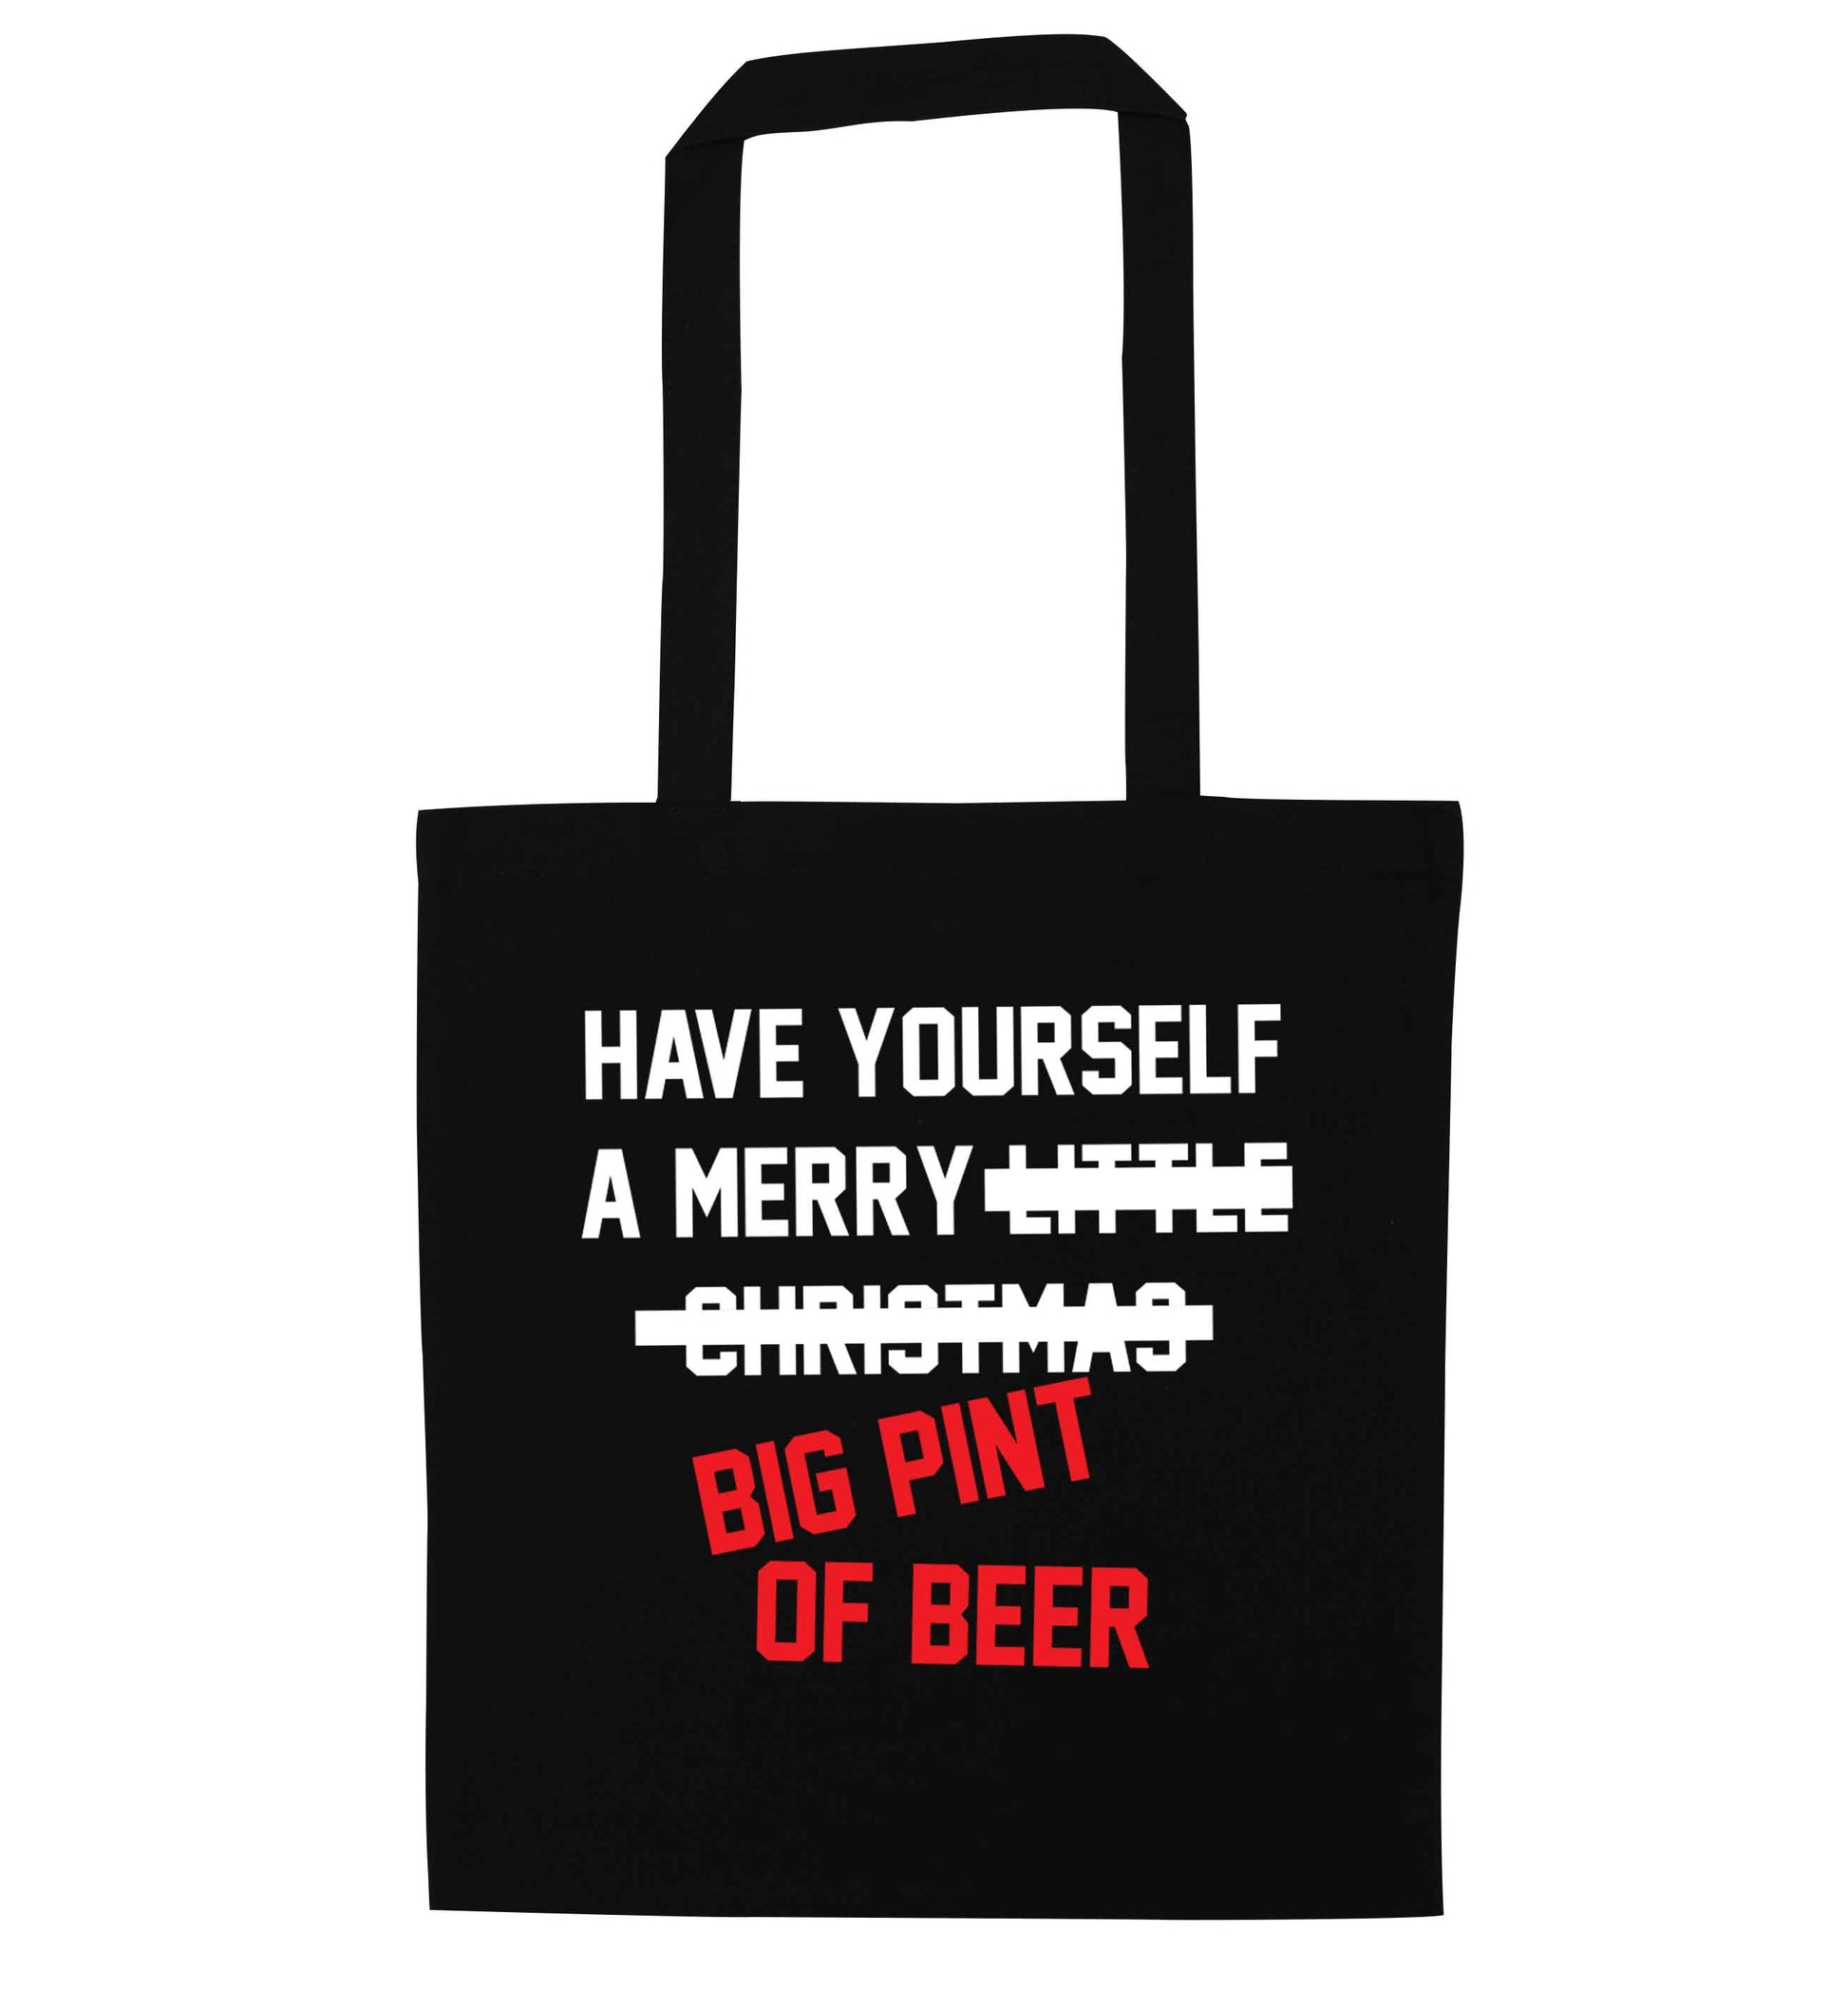 Have yourself a merry big pint of beer black tote bag